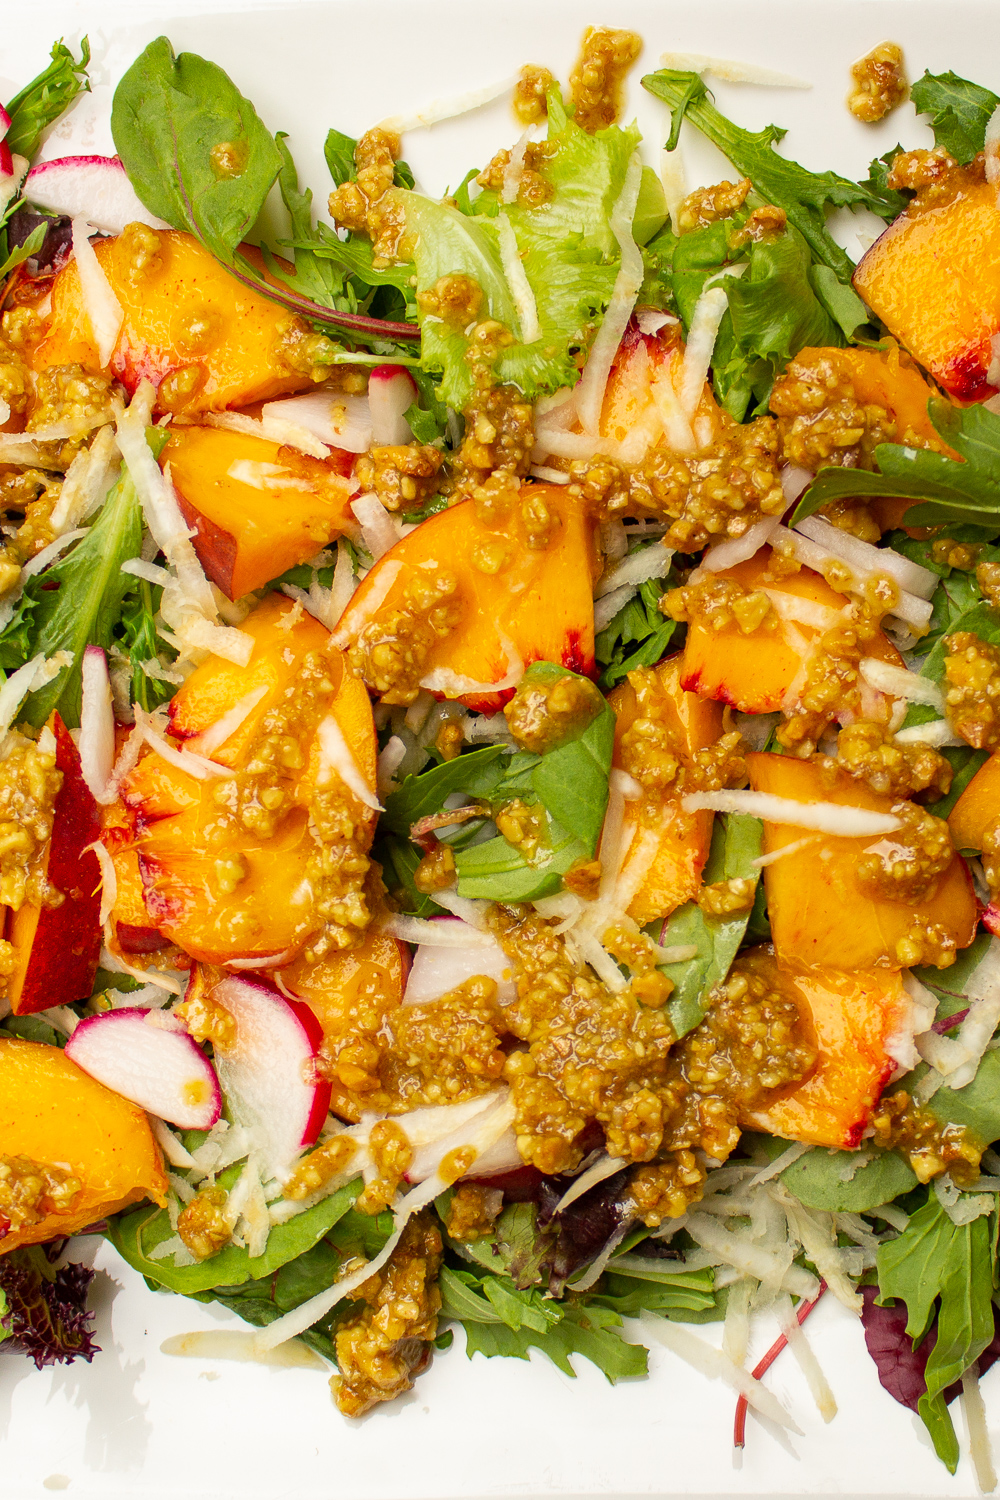 peach salad with walnut dressing on white plate p